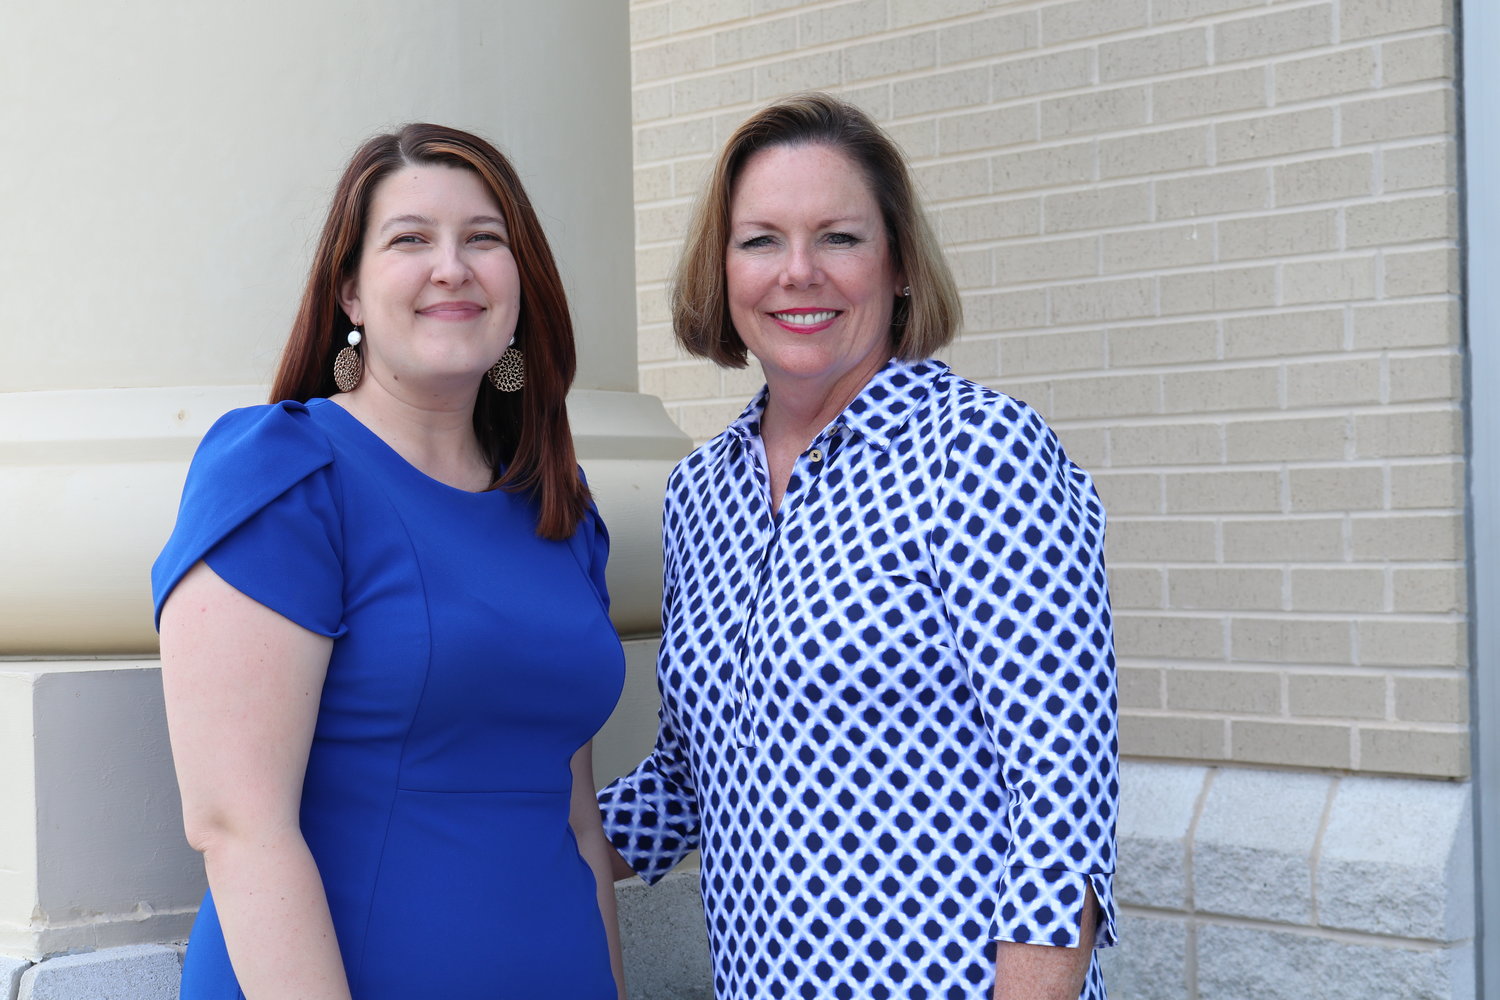 Pictured here, new principal of Baldwin County Virtual Elementary/Middle School Sarah Sadlis and Lead Teacher Janice Simon. The virtual school will experience expansions next school year with the addition of new activities and offerings for students.